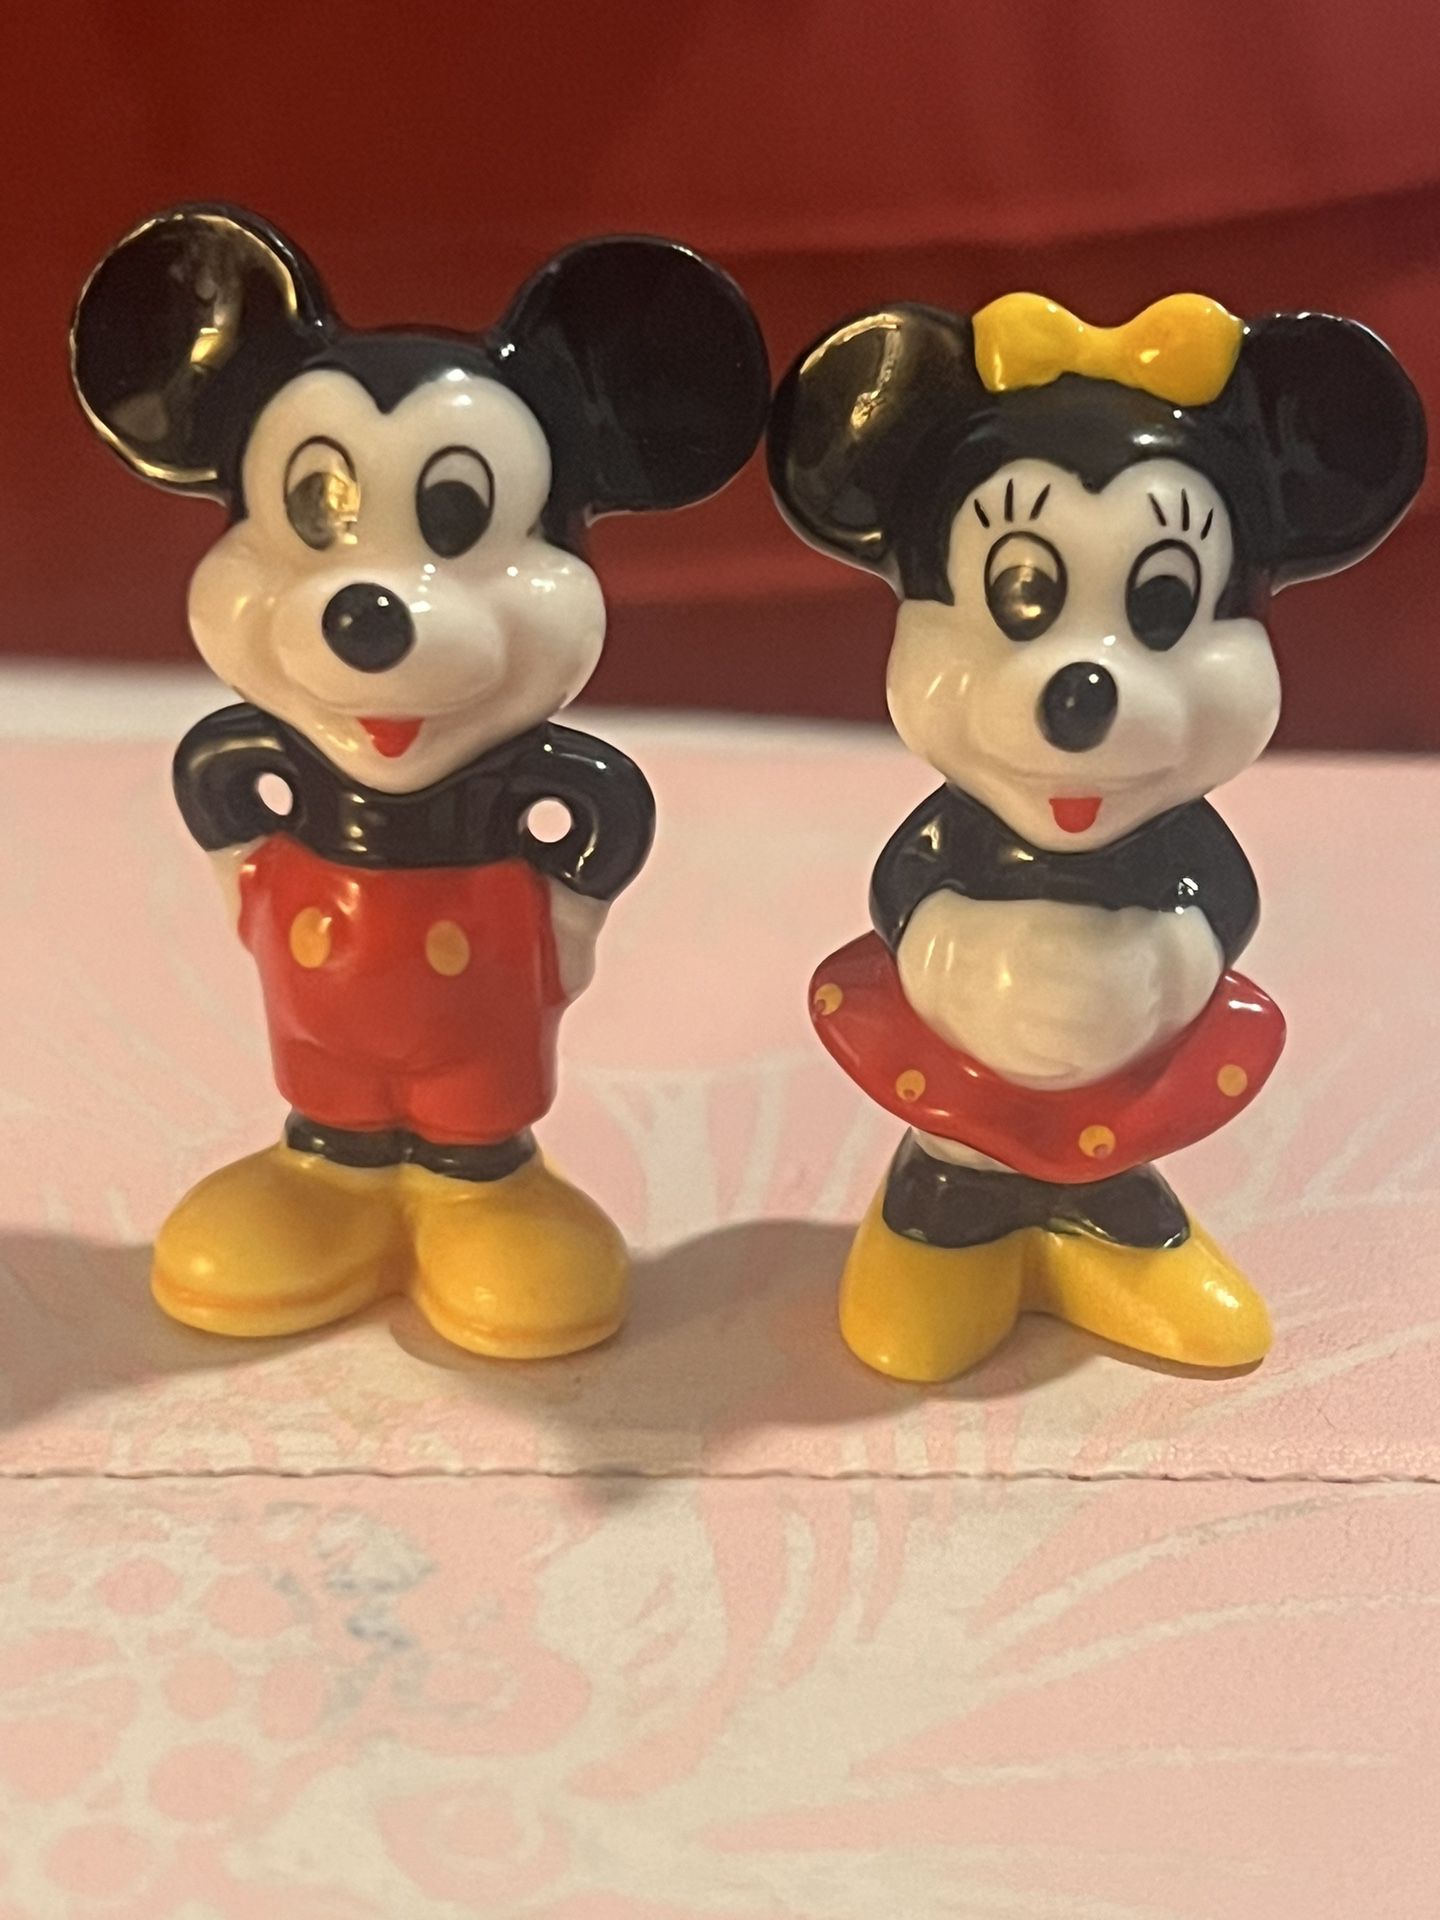 Vintage Disney Mickey and Minnie figures made in Taiwan in great condition!